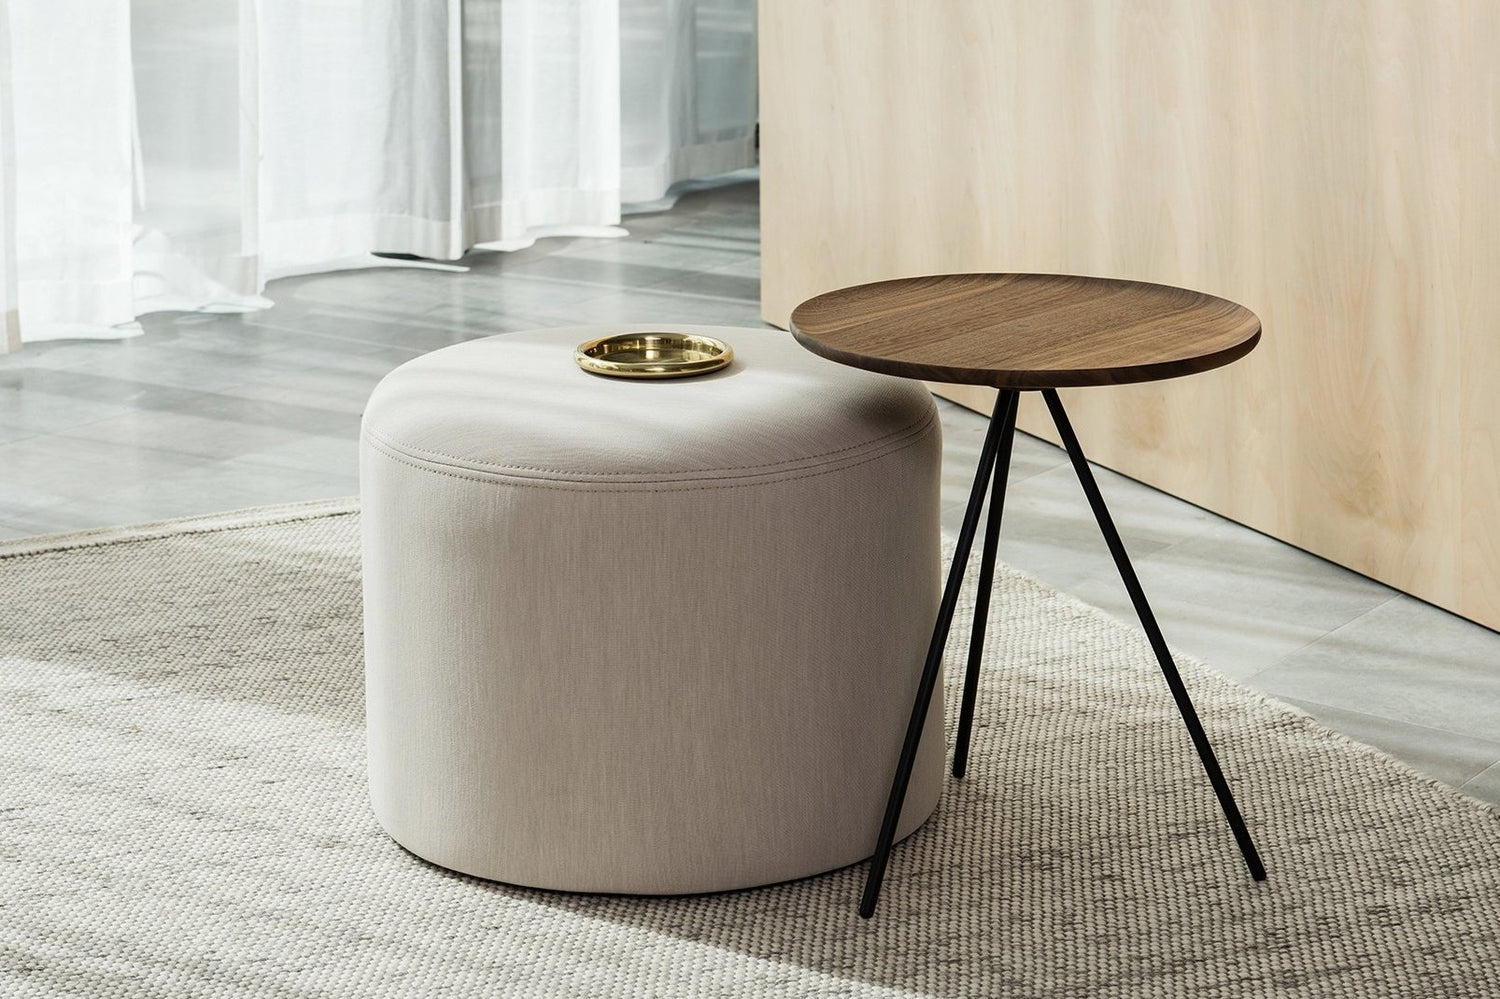 A Bon Pouf Round in Shell stands next to a Key Side Table in Walnut.